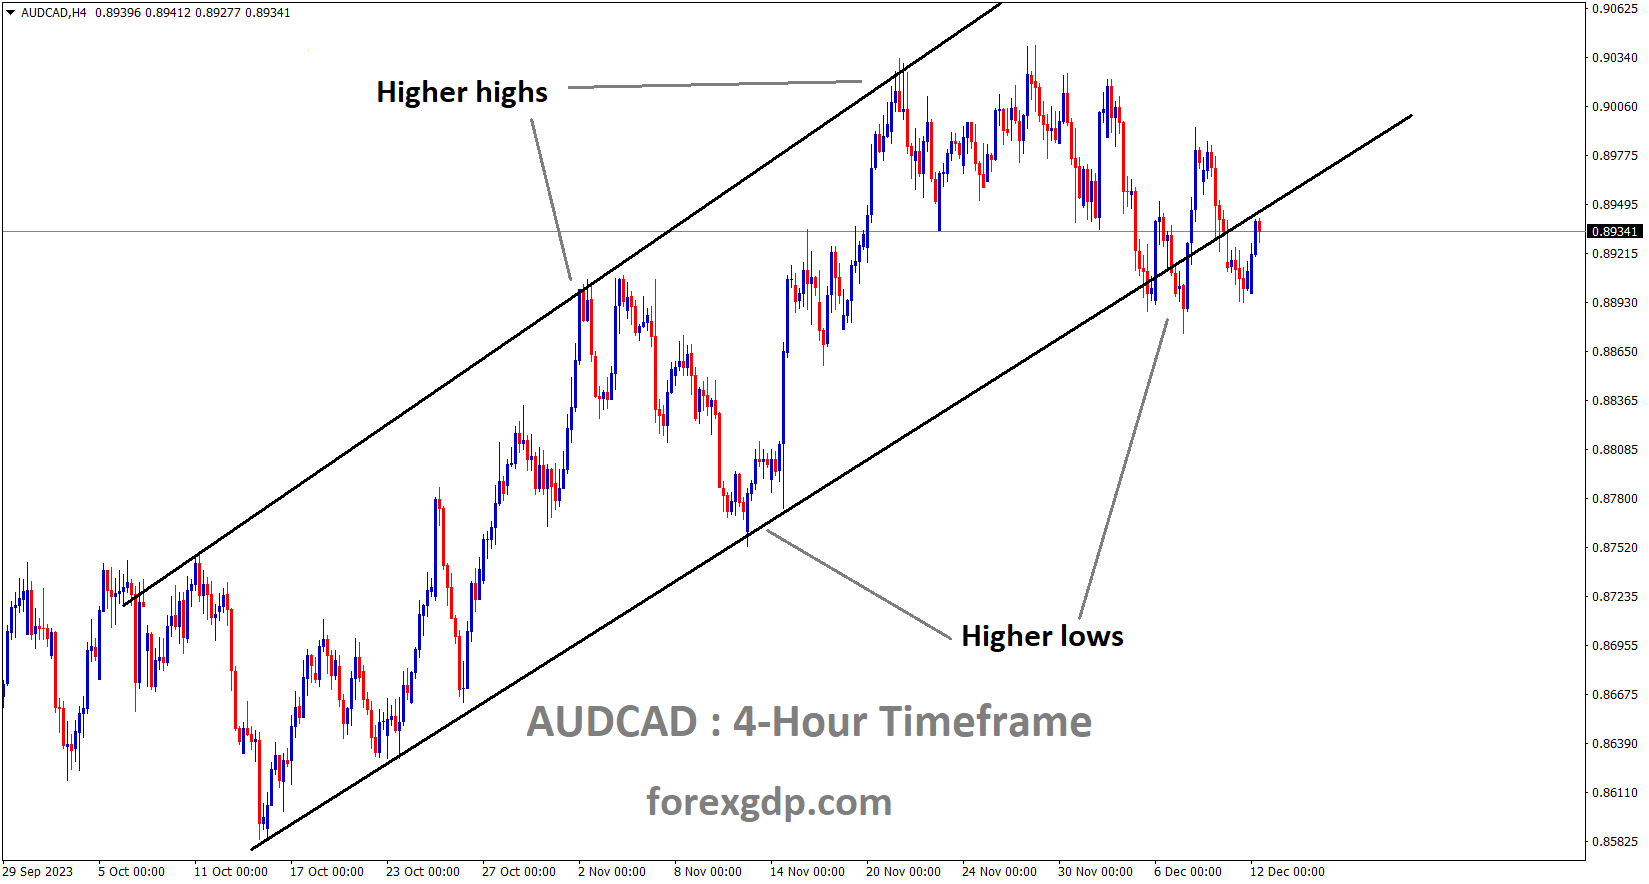 AUDCAD is moving in a Ascending channel and the Market has reached the higher low area